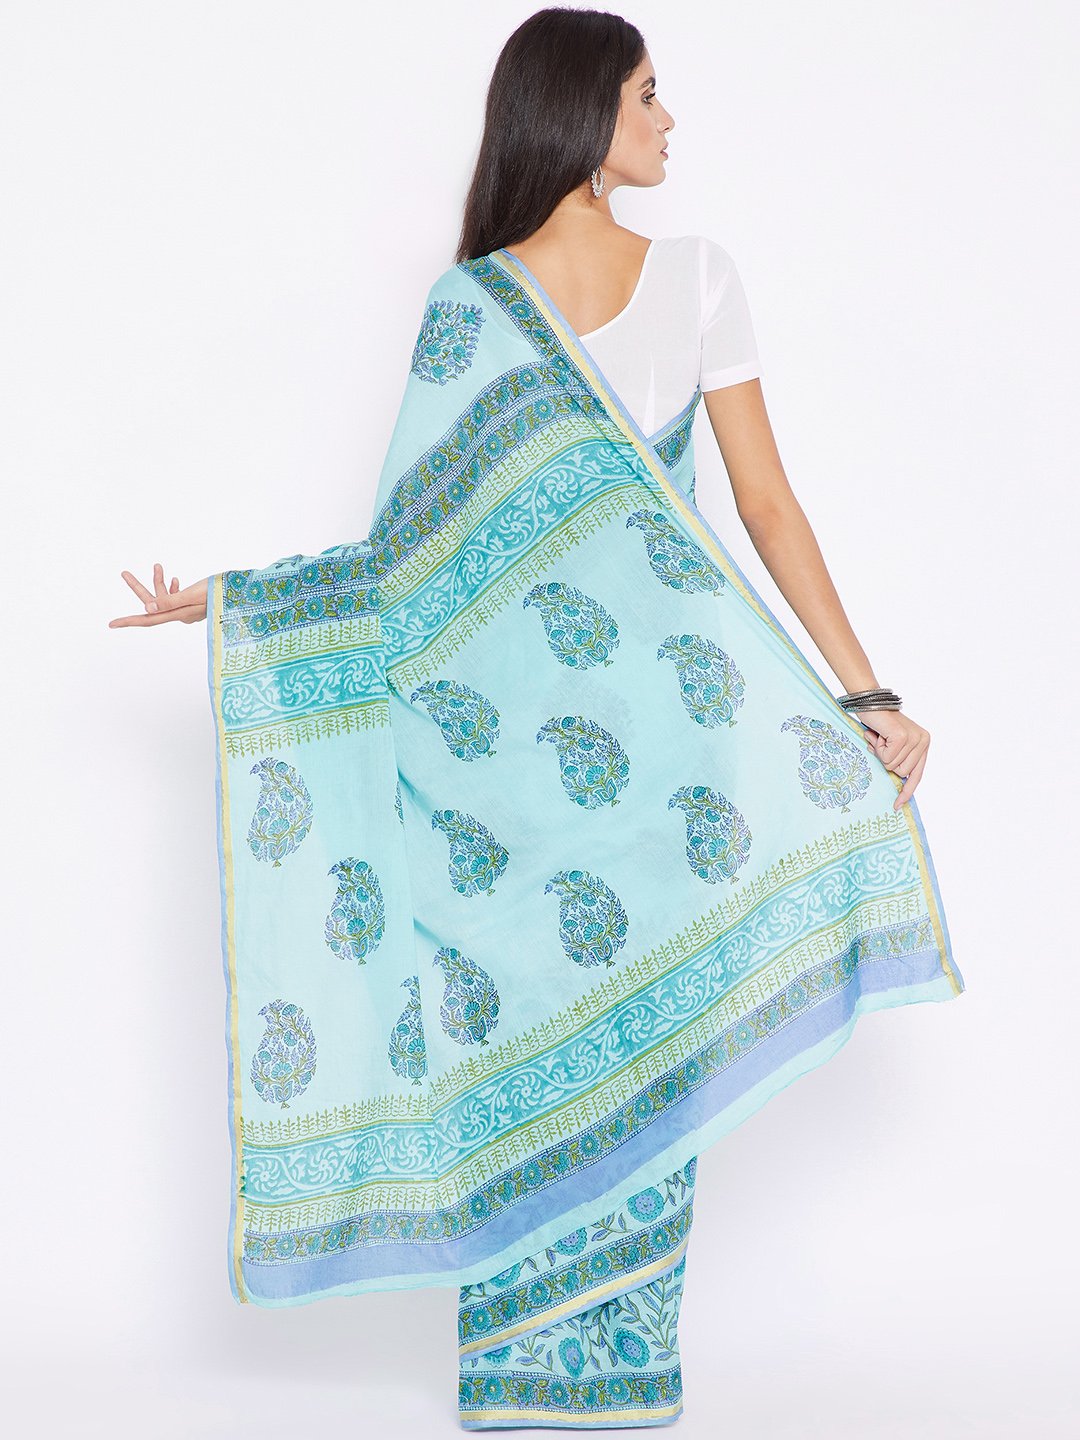 Blue Mughal Hand Block Print Handcrafted Cotton Silk Saree-Saree-Kalakari India-BHKPSA0025-Cotton, Geographical Indication, Hand Blocks, Hand Crafted, Heritage Prints, Sanganeri, Sarees, Sustainable Fabrics-[Linen,Ethnic,wear,Fashionista,Handloom,Handicraft,Indigo,blockprint,block,print,Cotton,Chanderi,Blue, latest,classy,party,bollywood,trendy,summer,style,traditional,formal,elegant,unique,style,hand,block,print, dabu,booti,gift,present,glamorous,affordable,collectible,Sari,Saree,printed, holi,